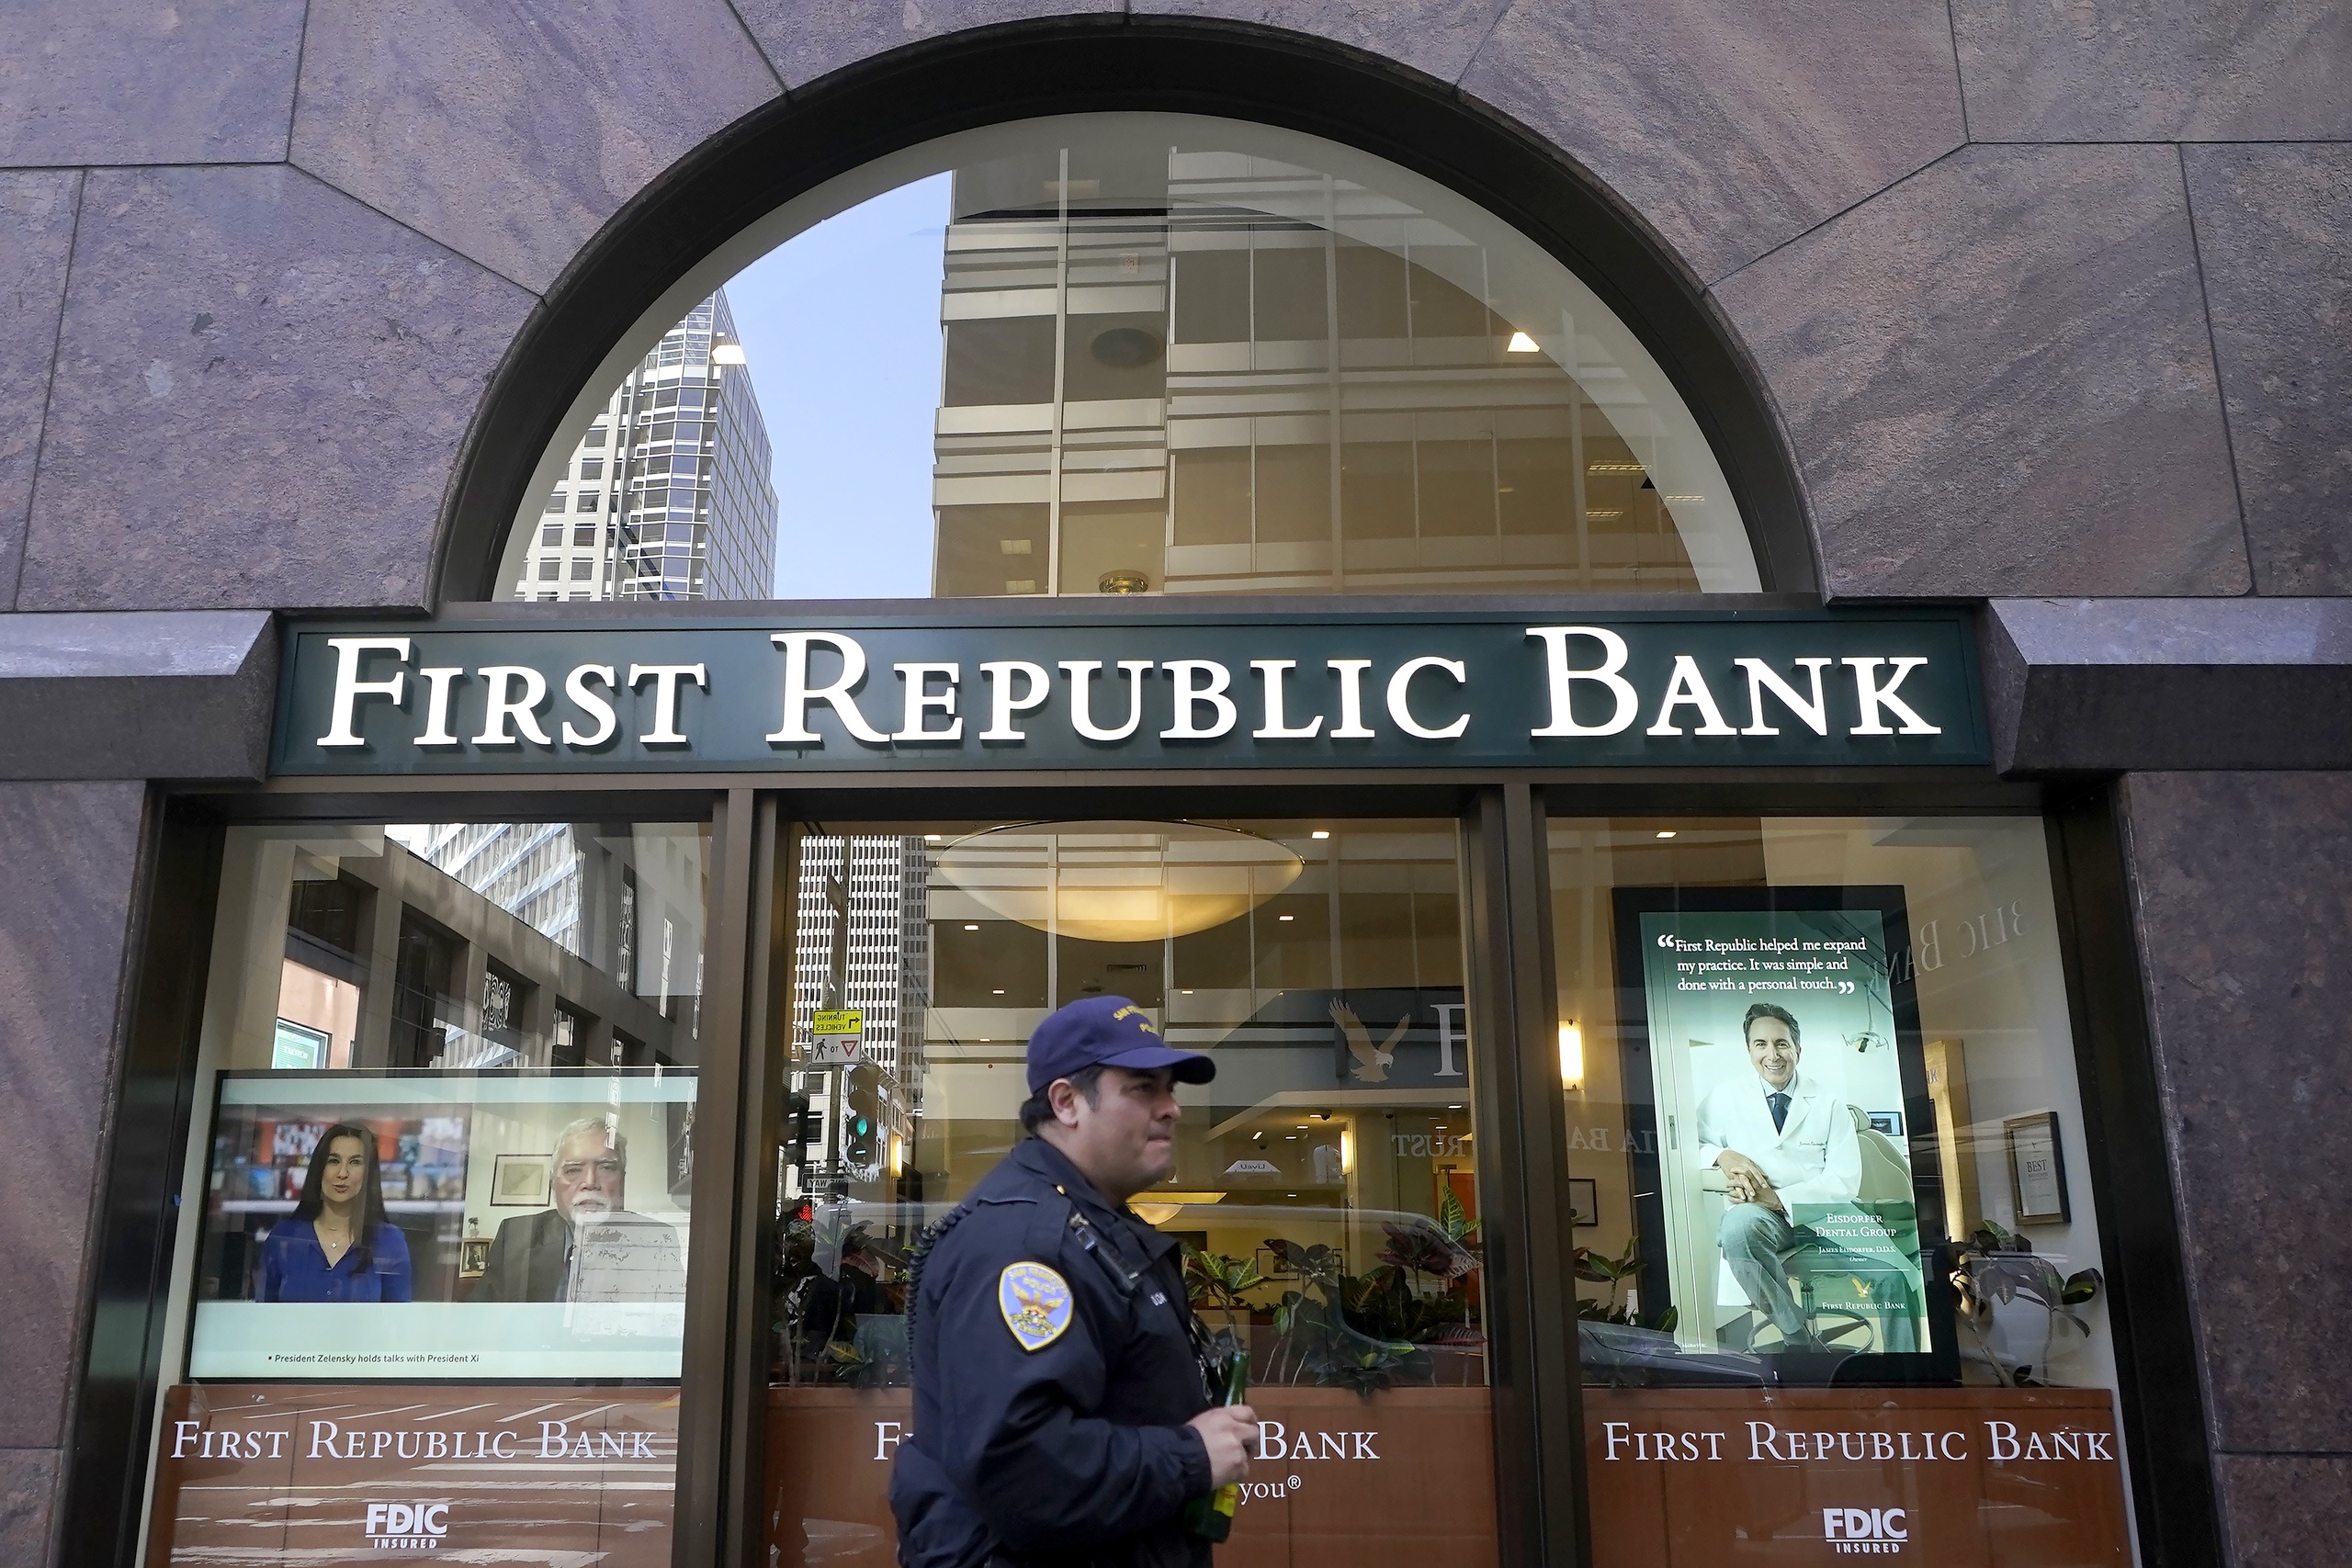 Last week, First Republic's stock lost about 75 percent of its market value.